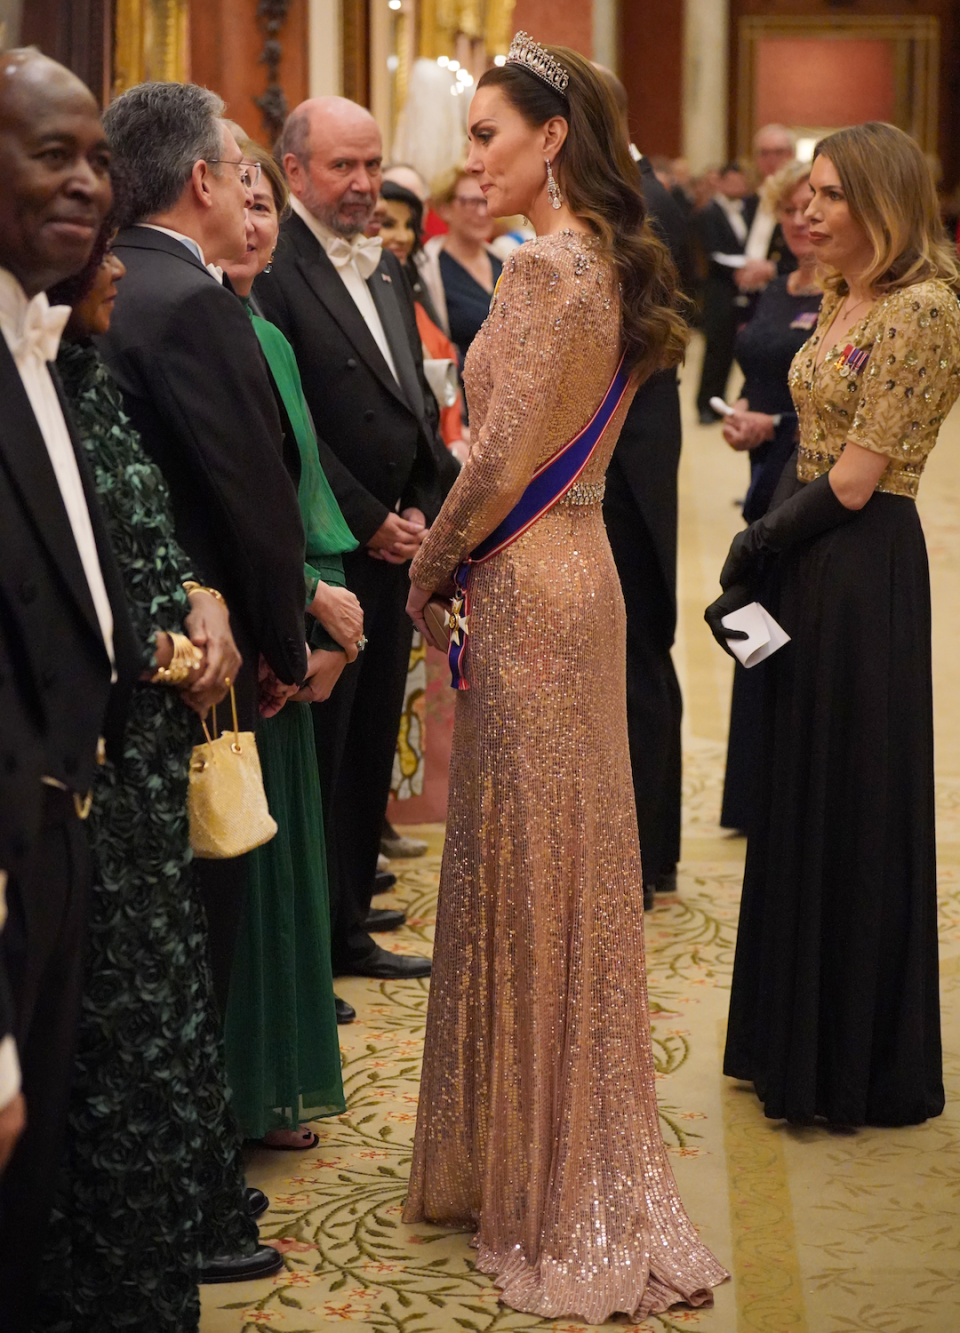 <p> For the annual Diplomatic Corps reception in 2023, the princess wore the iconic Lover's Knot Tiara - which is made from diamonds and pearls. She has worn it the most out of all the tiaras she has been seen in over the years. </p>